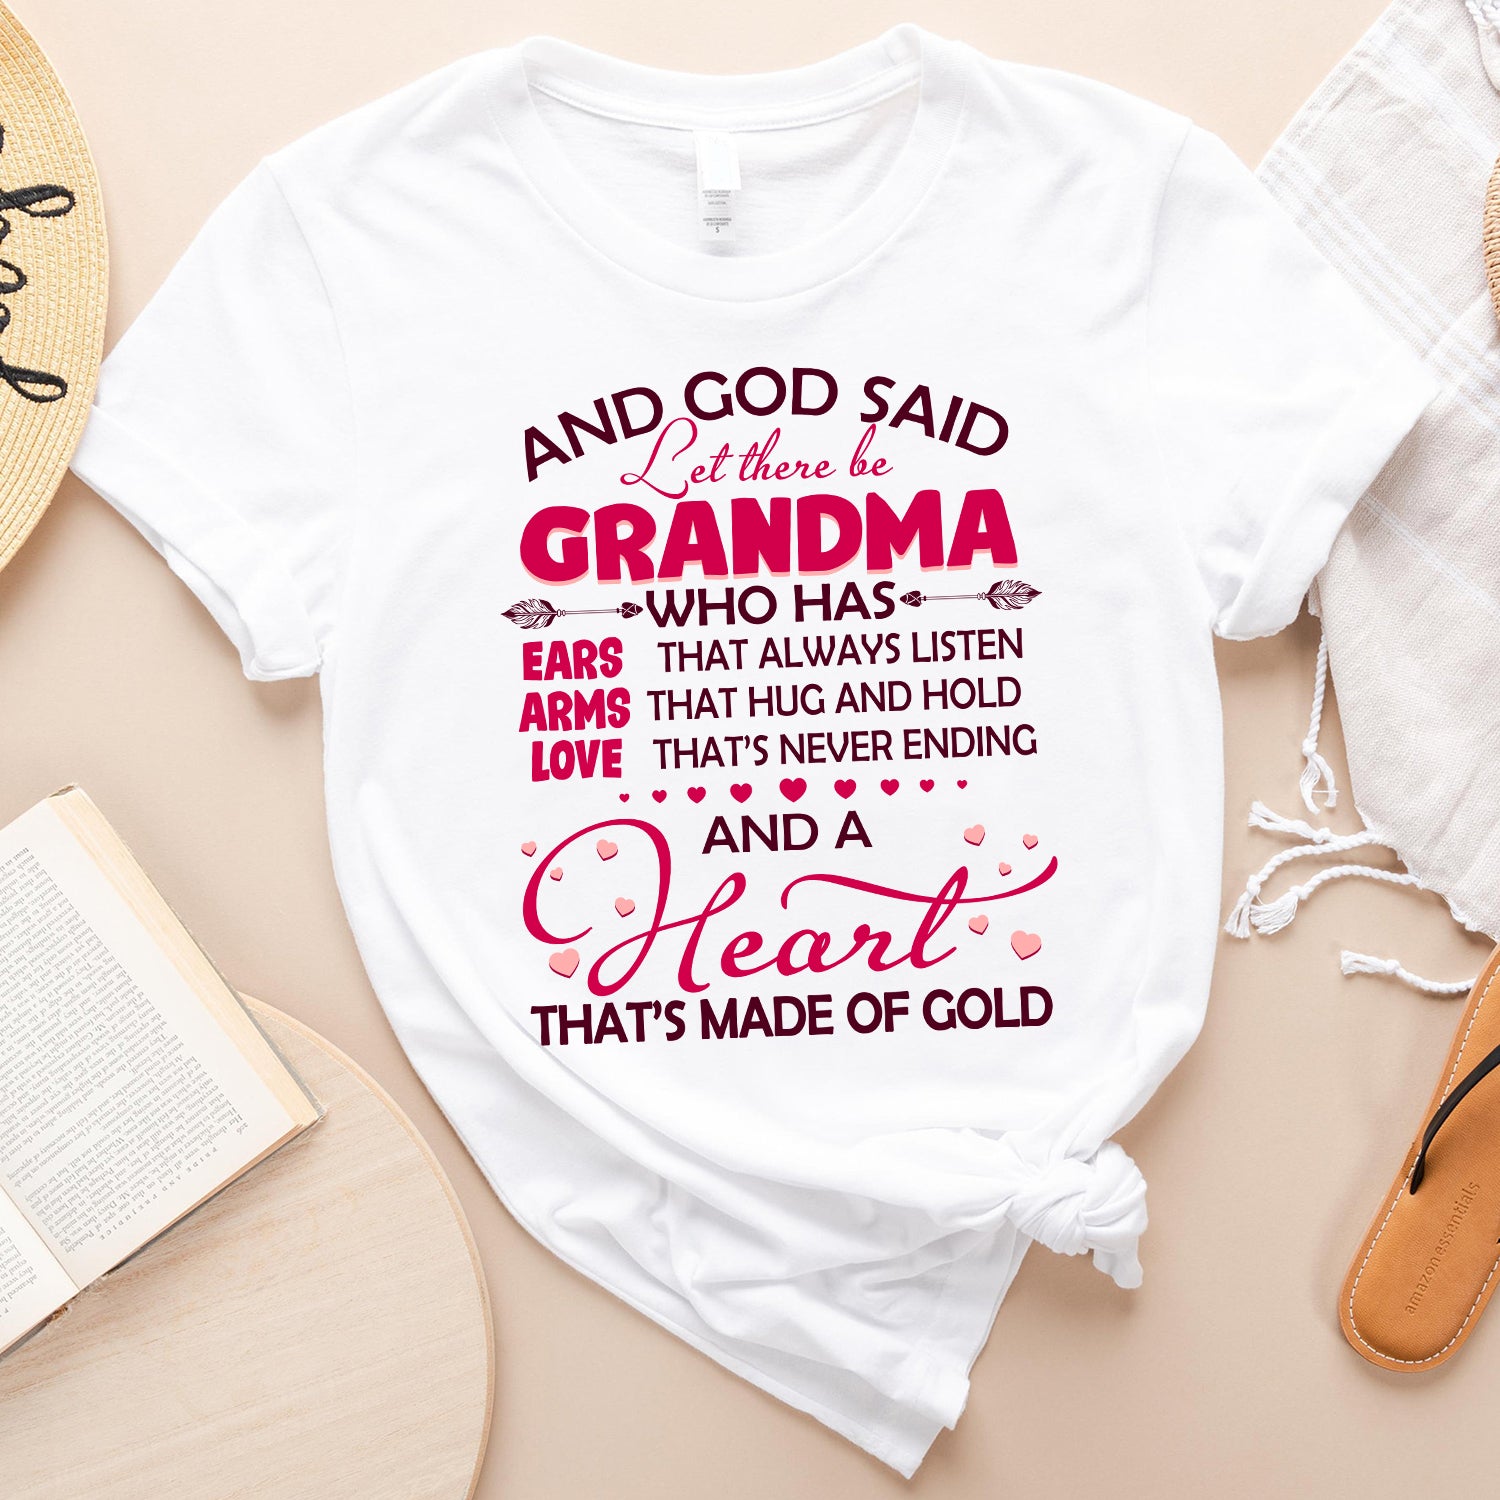 God Said Let There Be Grandma Who Has Ears That Always Listen Standard T-Shirt